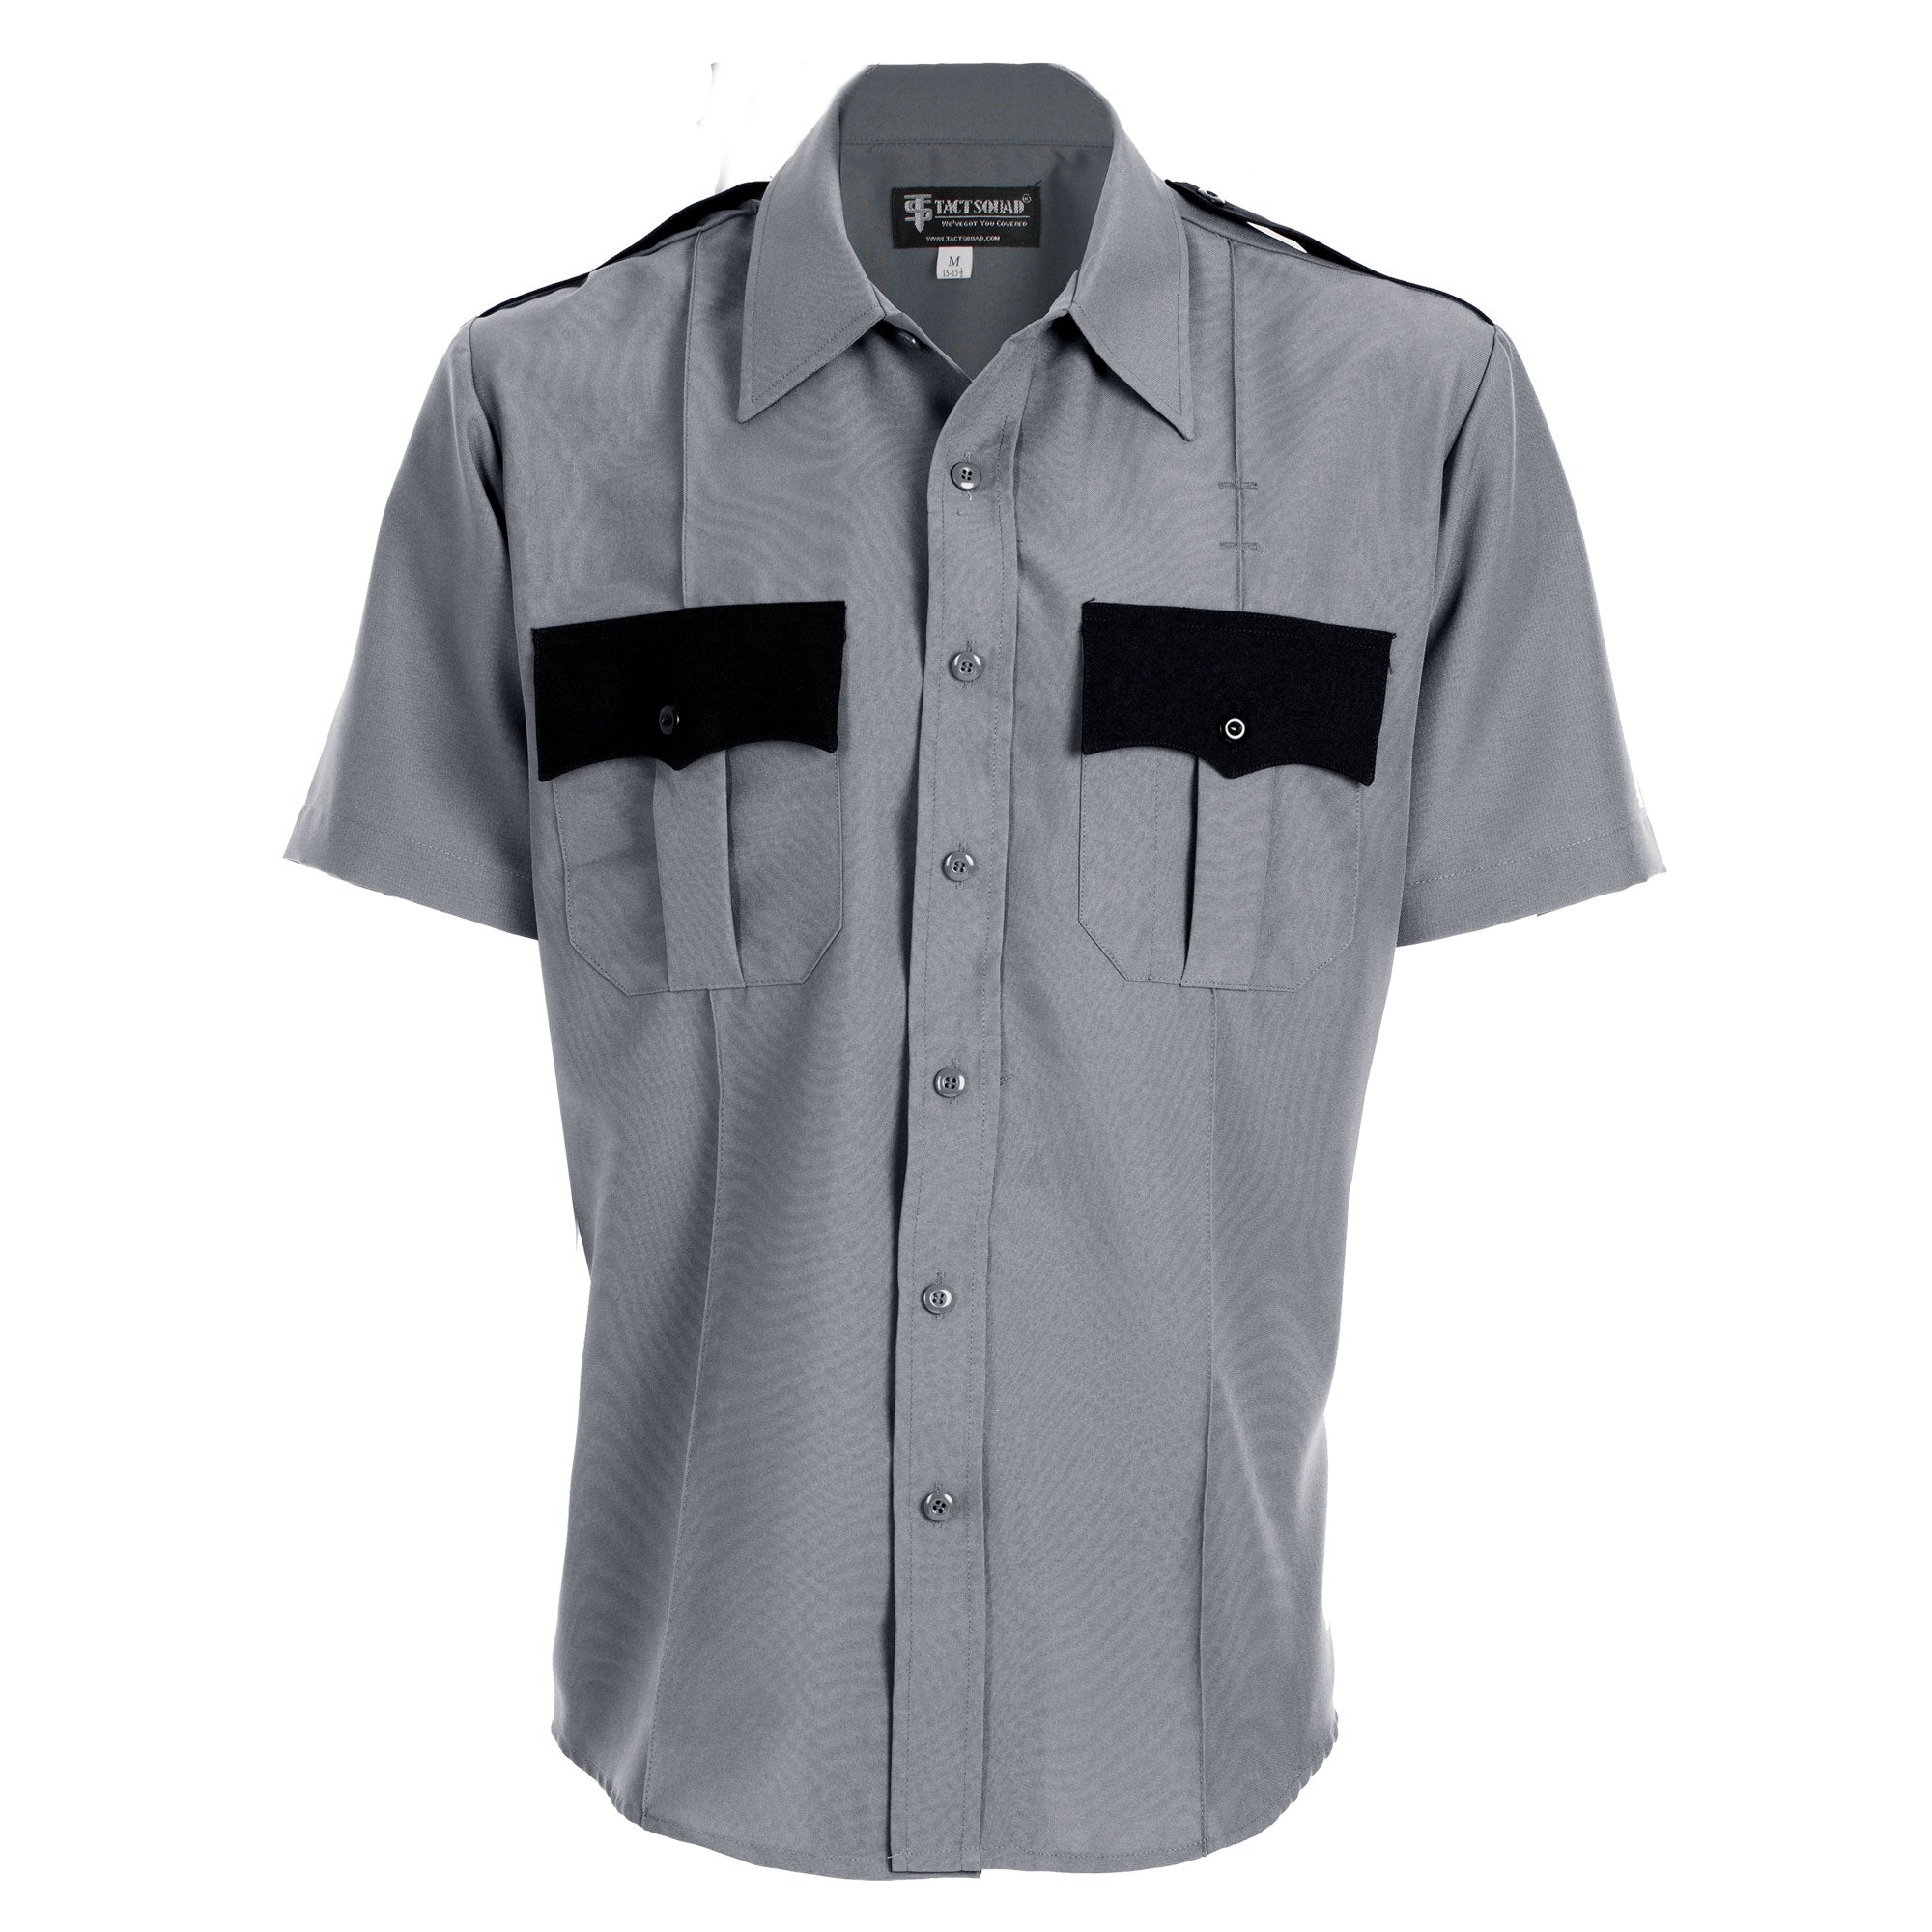 100% Polyester half Sleeve  S/S Two-Tone Zipper Shirt in color Grey & Black